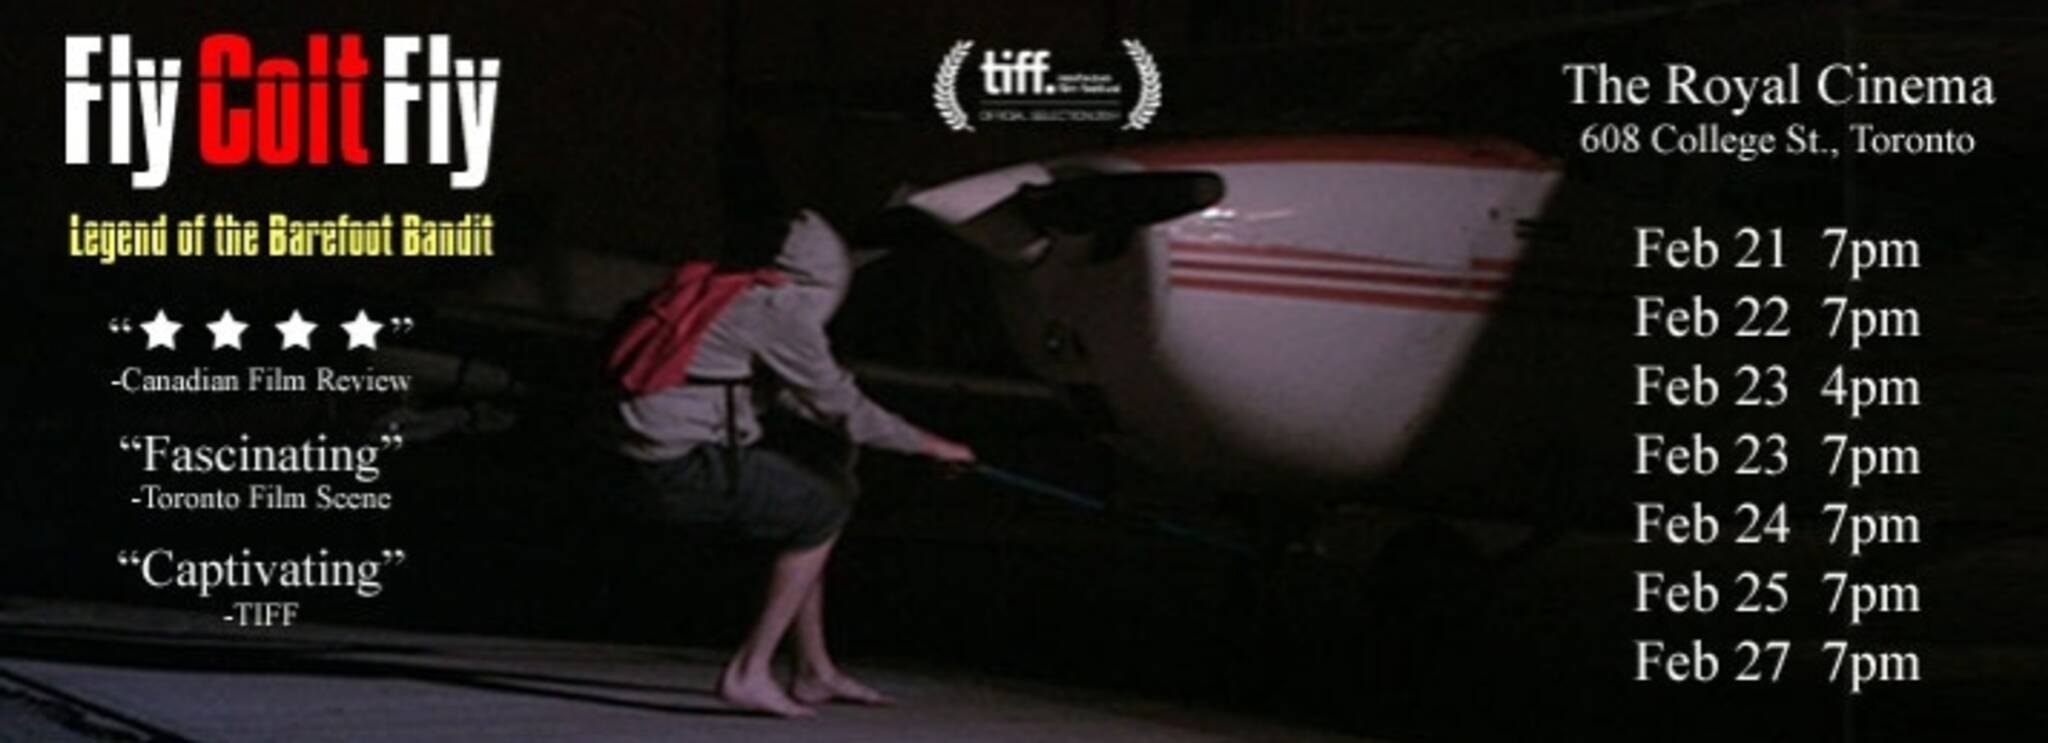 Fly Colt Fly : Legend OF The Barefoot Bandit - screening at The